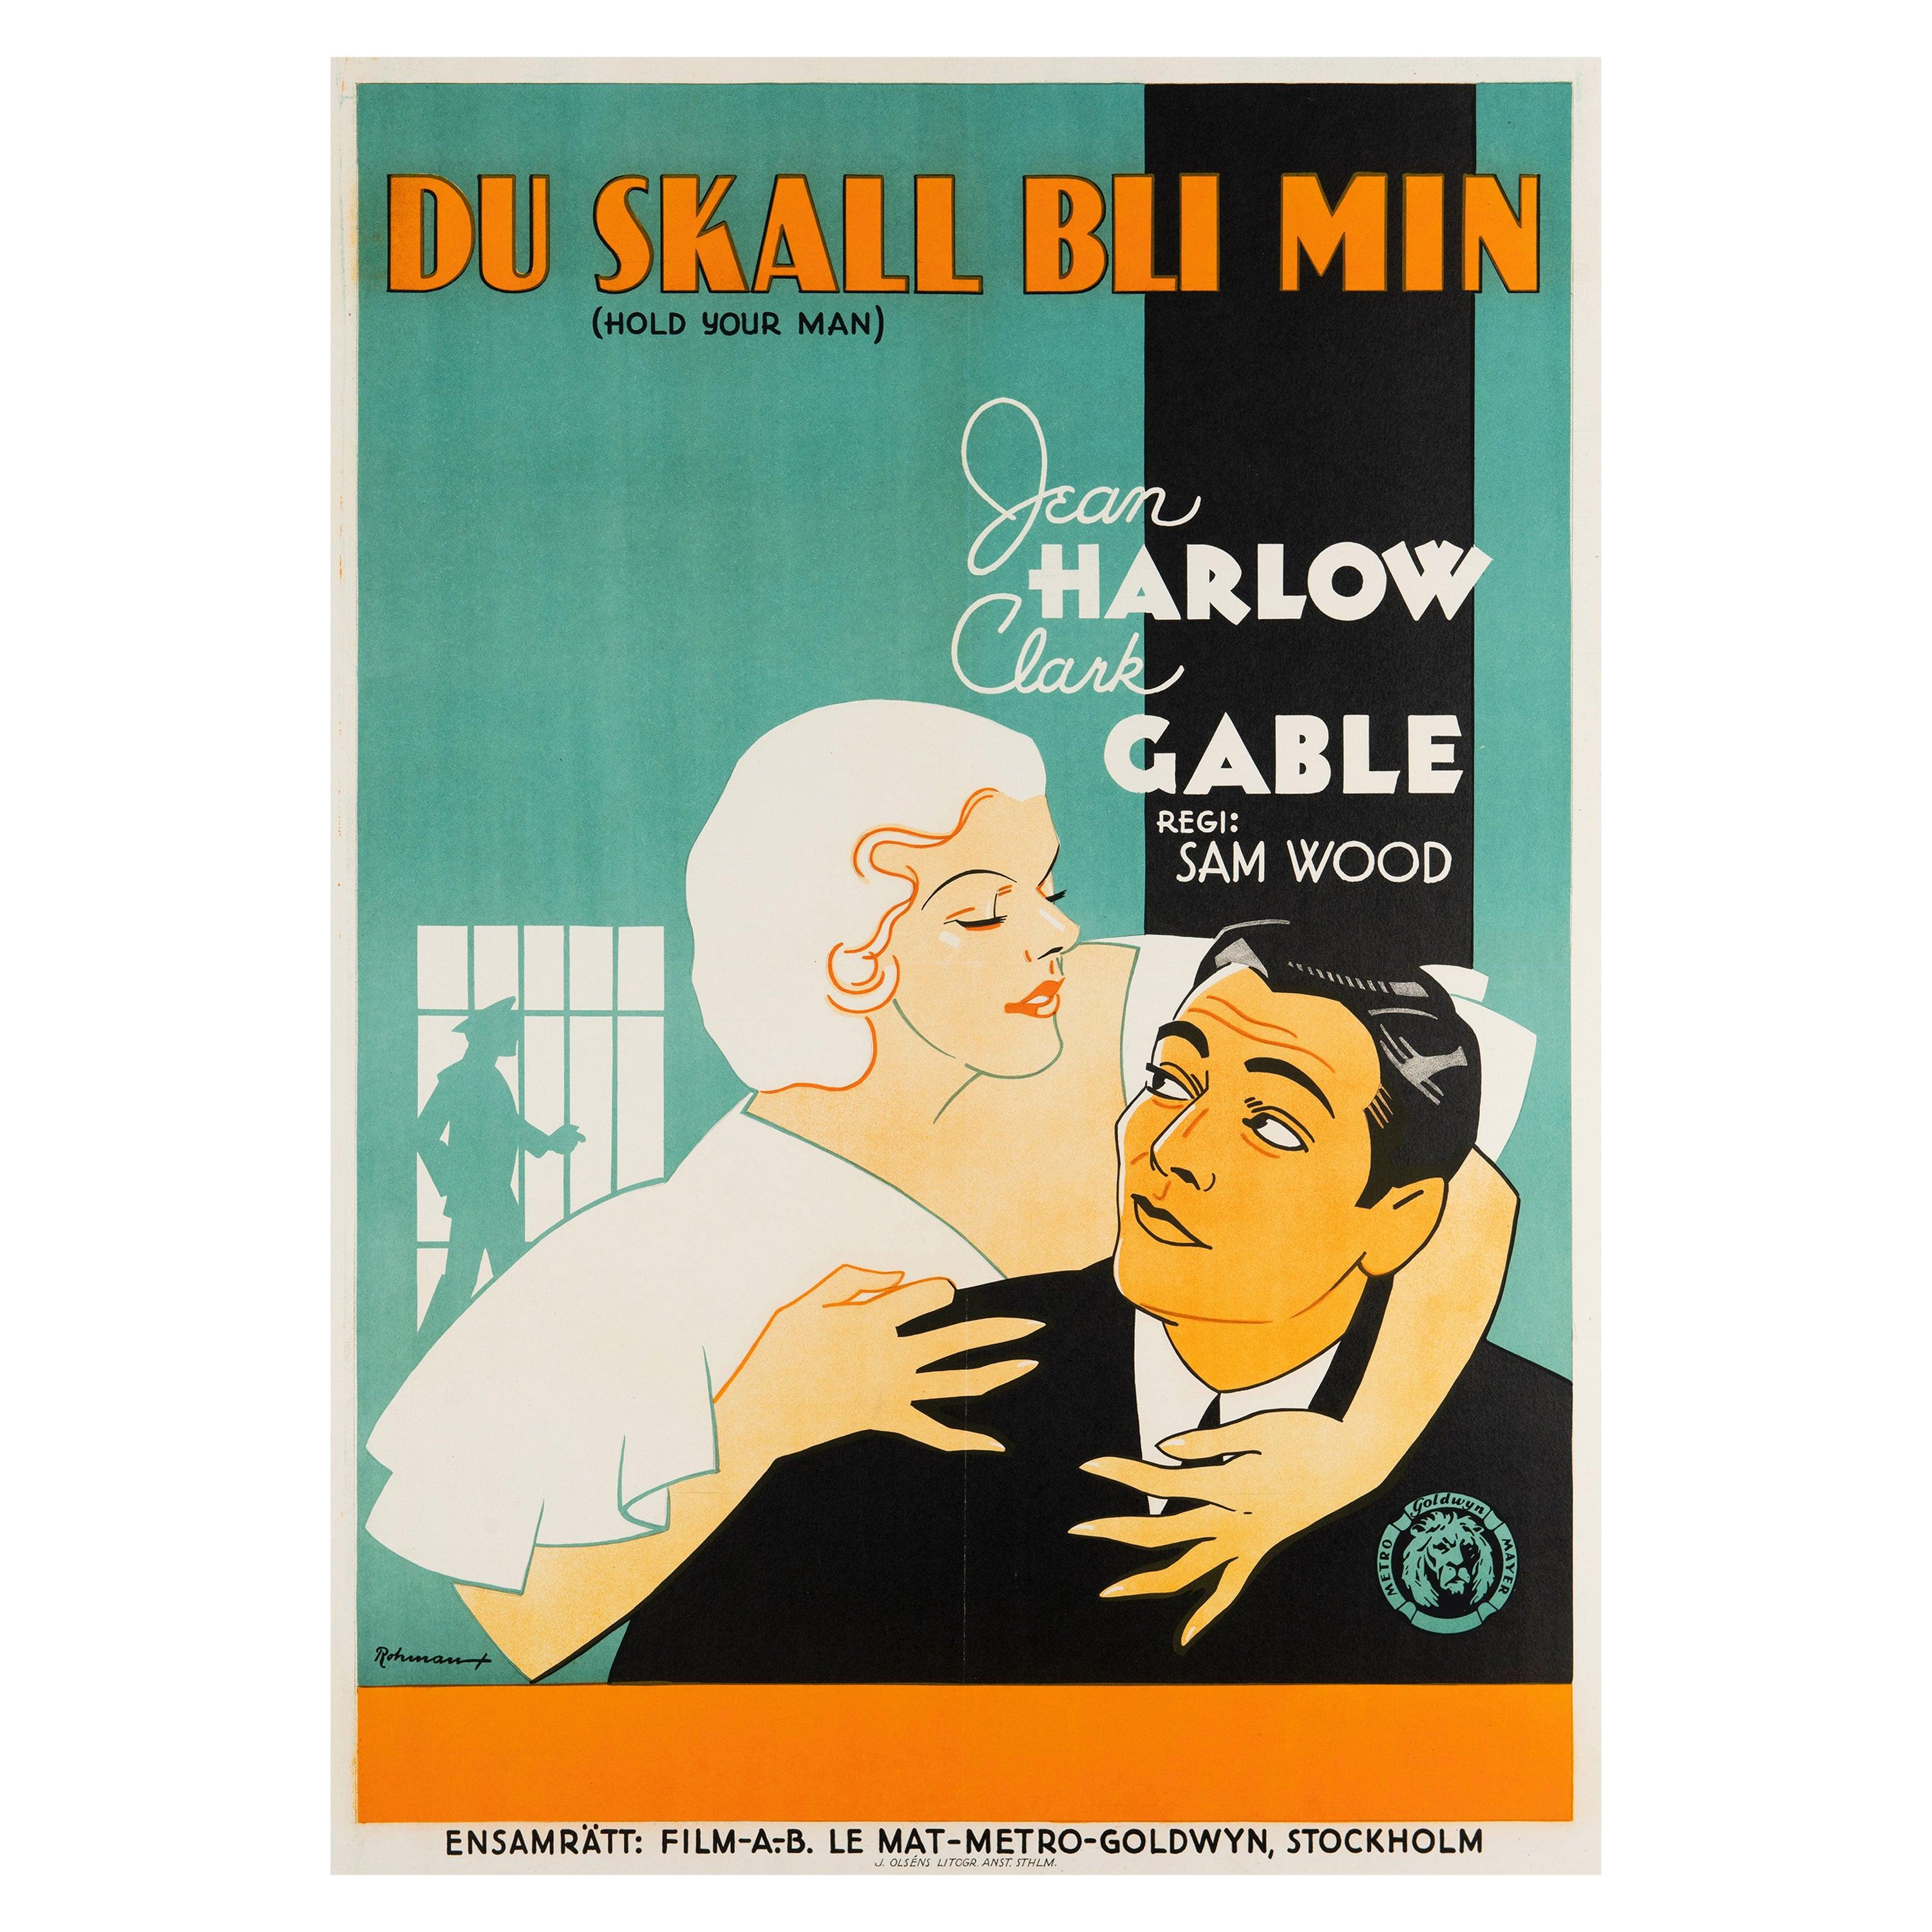 A splendid stone lithograph poster with bold Art Deco artwork by noted Swedish designer Eric Rohman for the Swedish release of MGM's 1933 pre-Code romantic drama 'Hold Your Man.' Starring regular collaborators Jean Harlow and Clark Gable as small